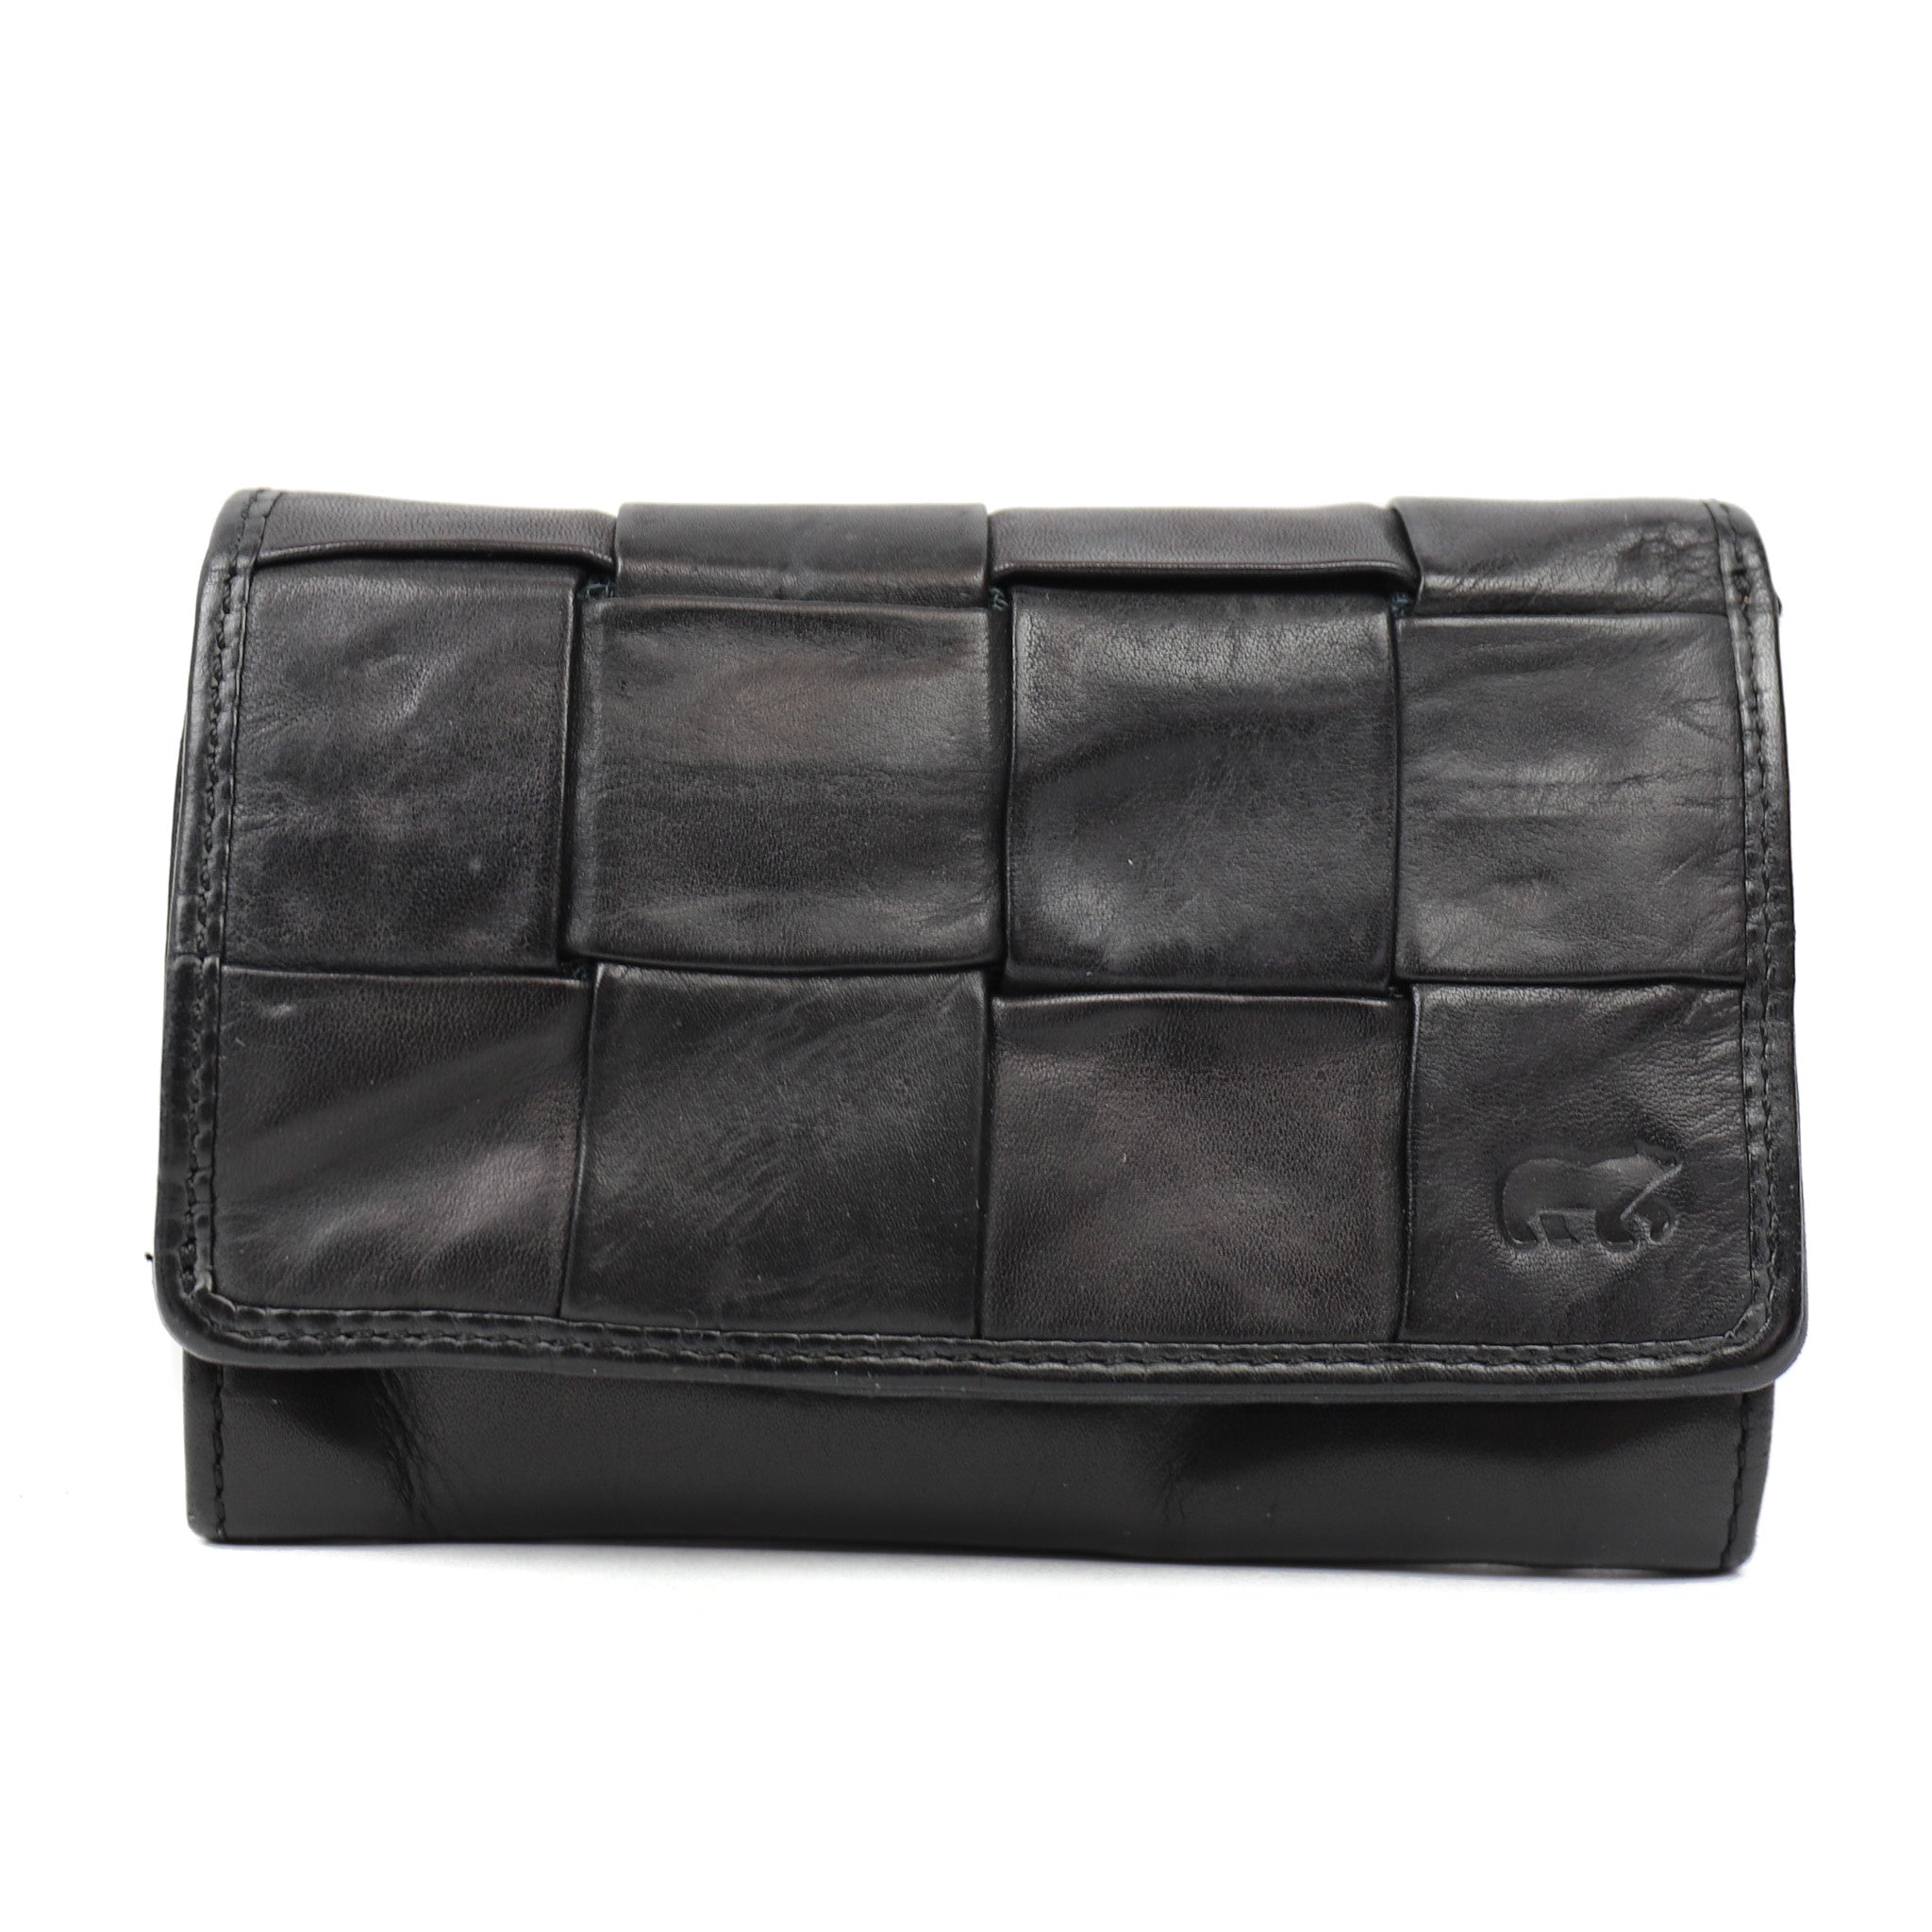 Wrap wallet 'Flappie' black braided - CL 19005